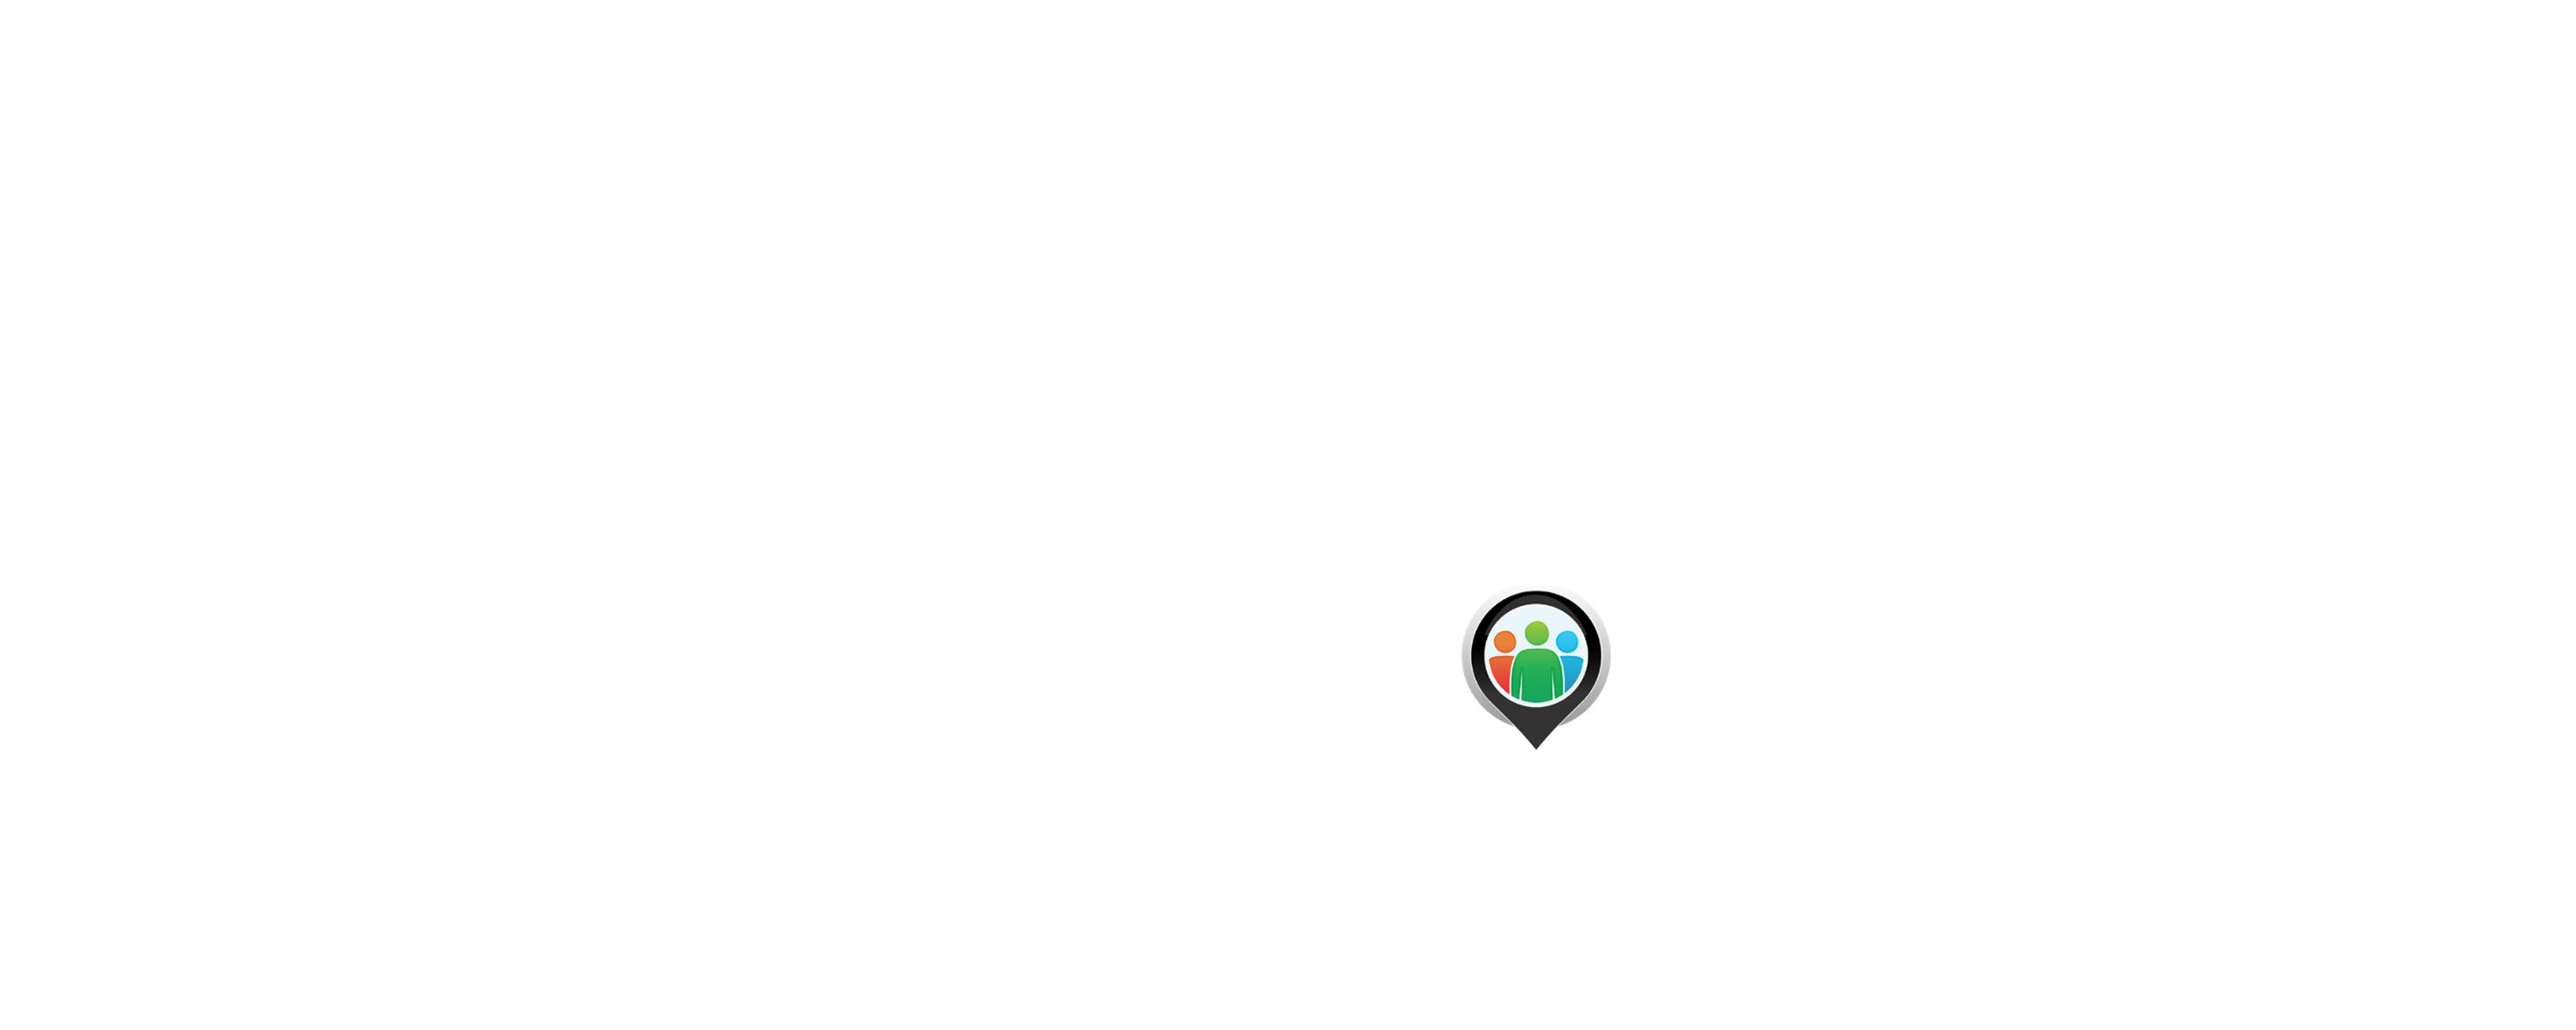 The Human Centric Office